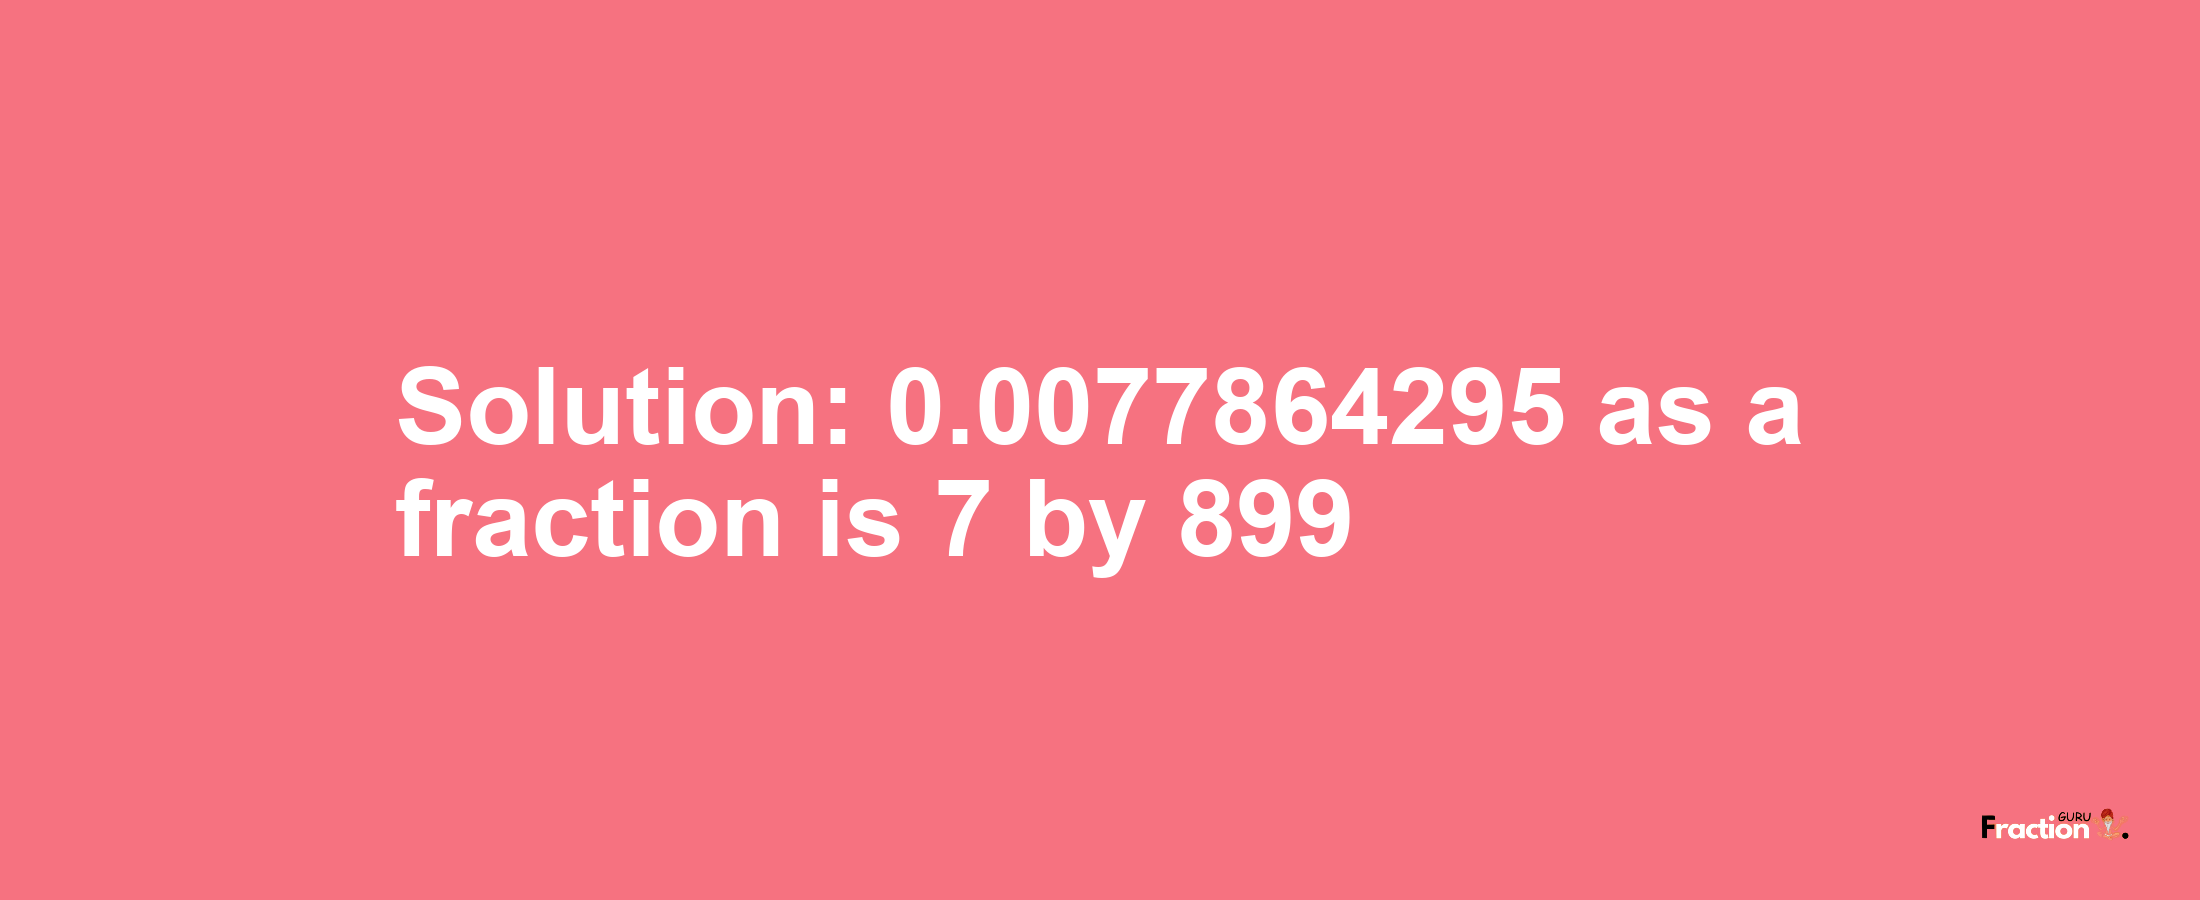 Solution:0.0077864295 as a fraction is 7/899